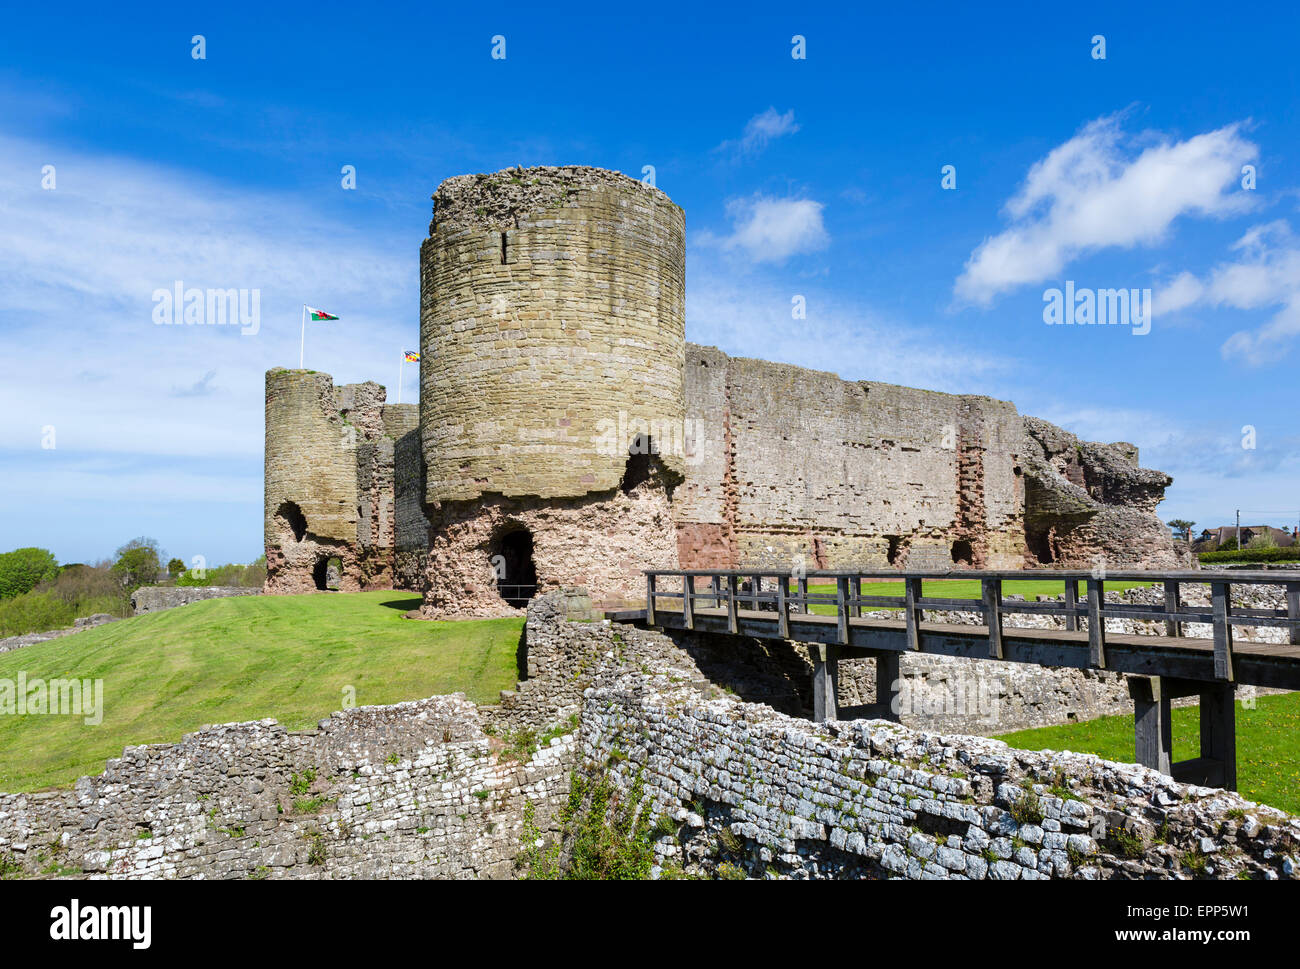 The ruins of Rhuddlan Castle on the River Clwyd, Rhuddlan, Denbighshire, Wales, UK Stock Photo